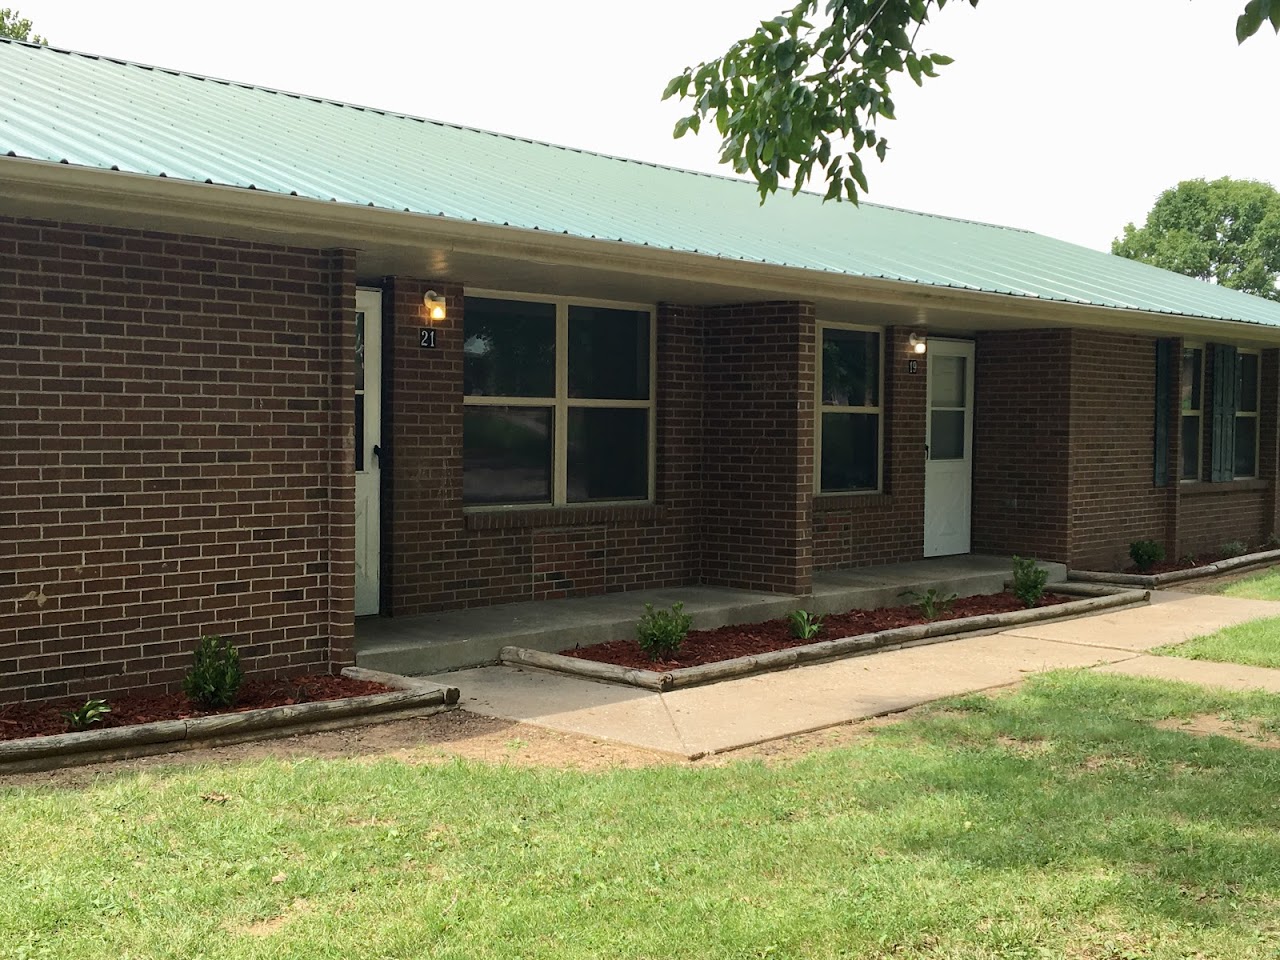 Photo of Housing Authority of the City of Sainte Genevieve. Affordable housing located at 35 ROBINWOOD Drive SAINTE GENEVIEVE, MO 63670